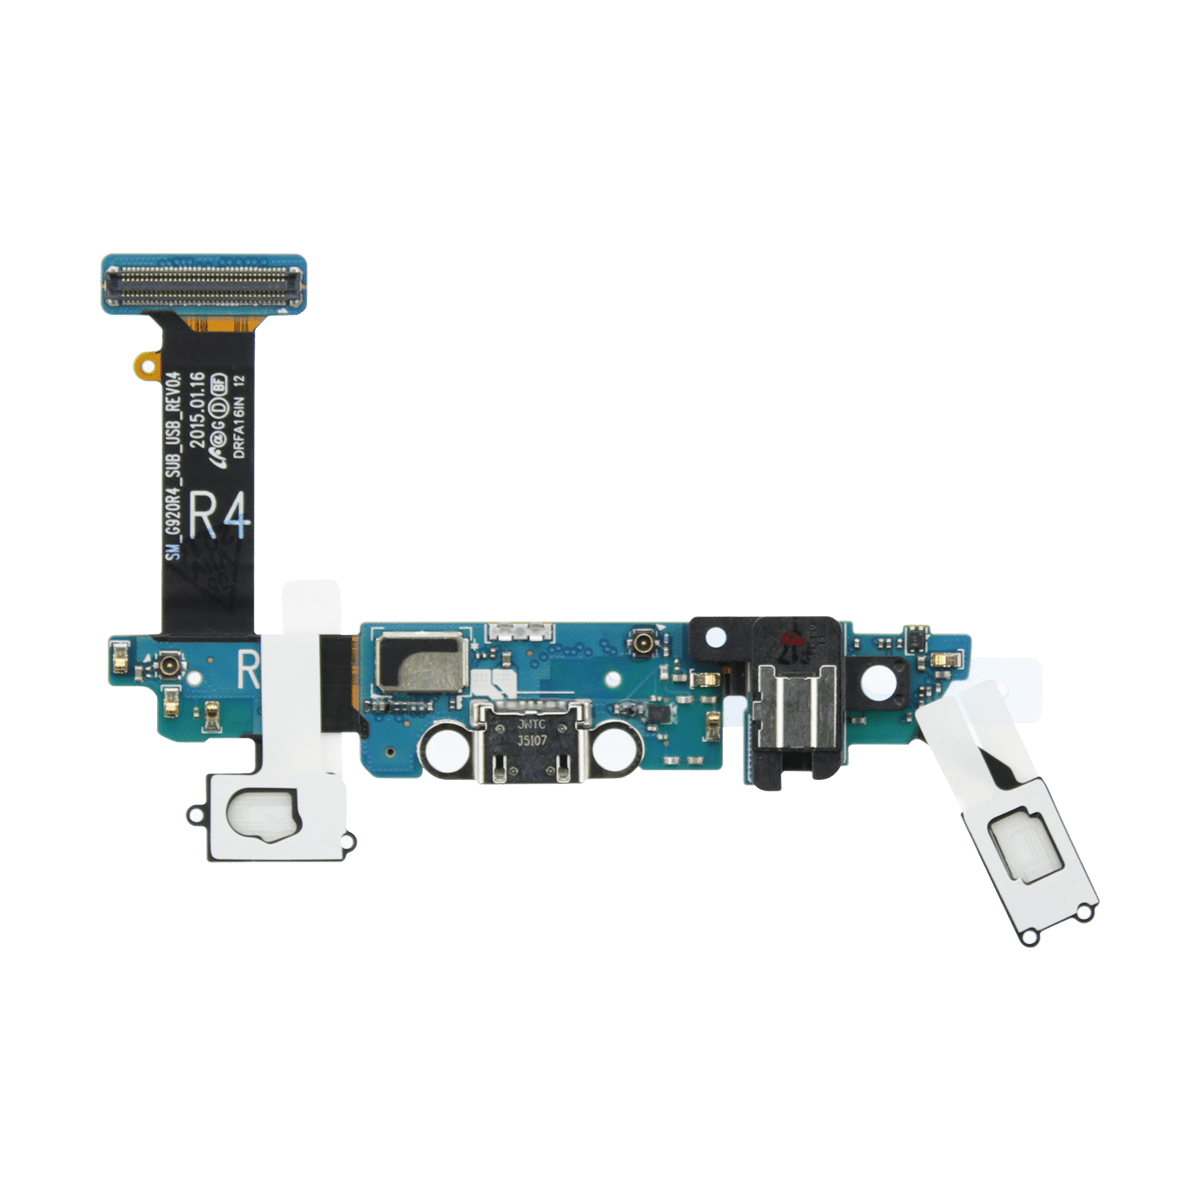 Samsung Galaxy S6 G920R4 Dock Port and Headphone Jack Assembly